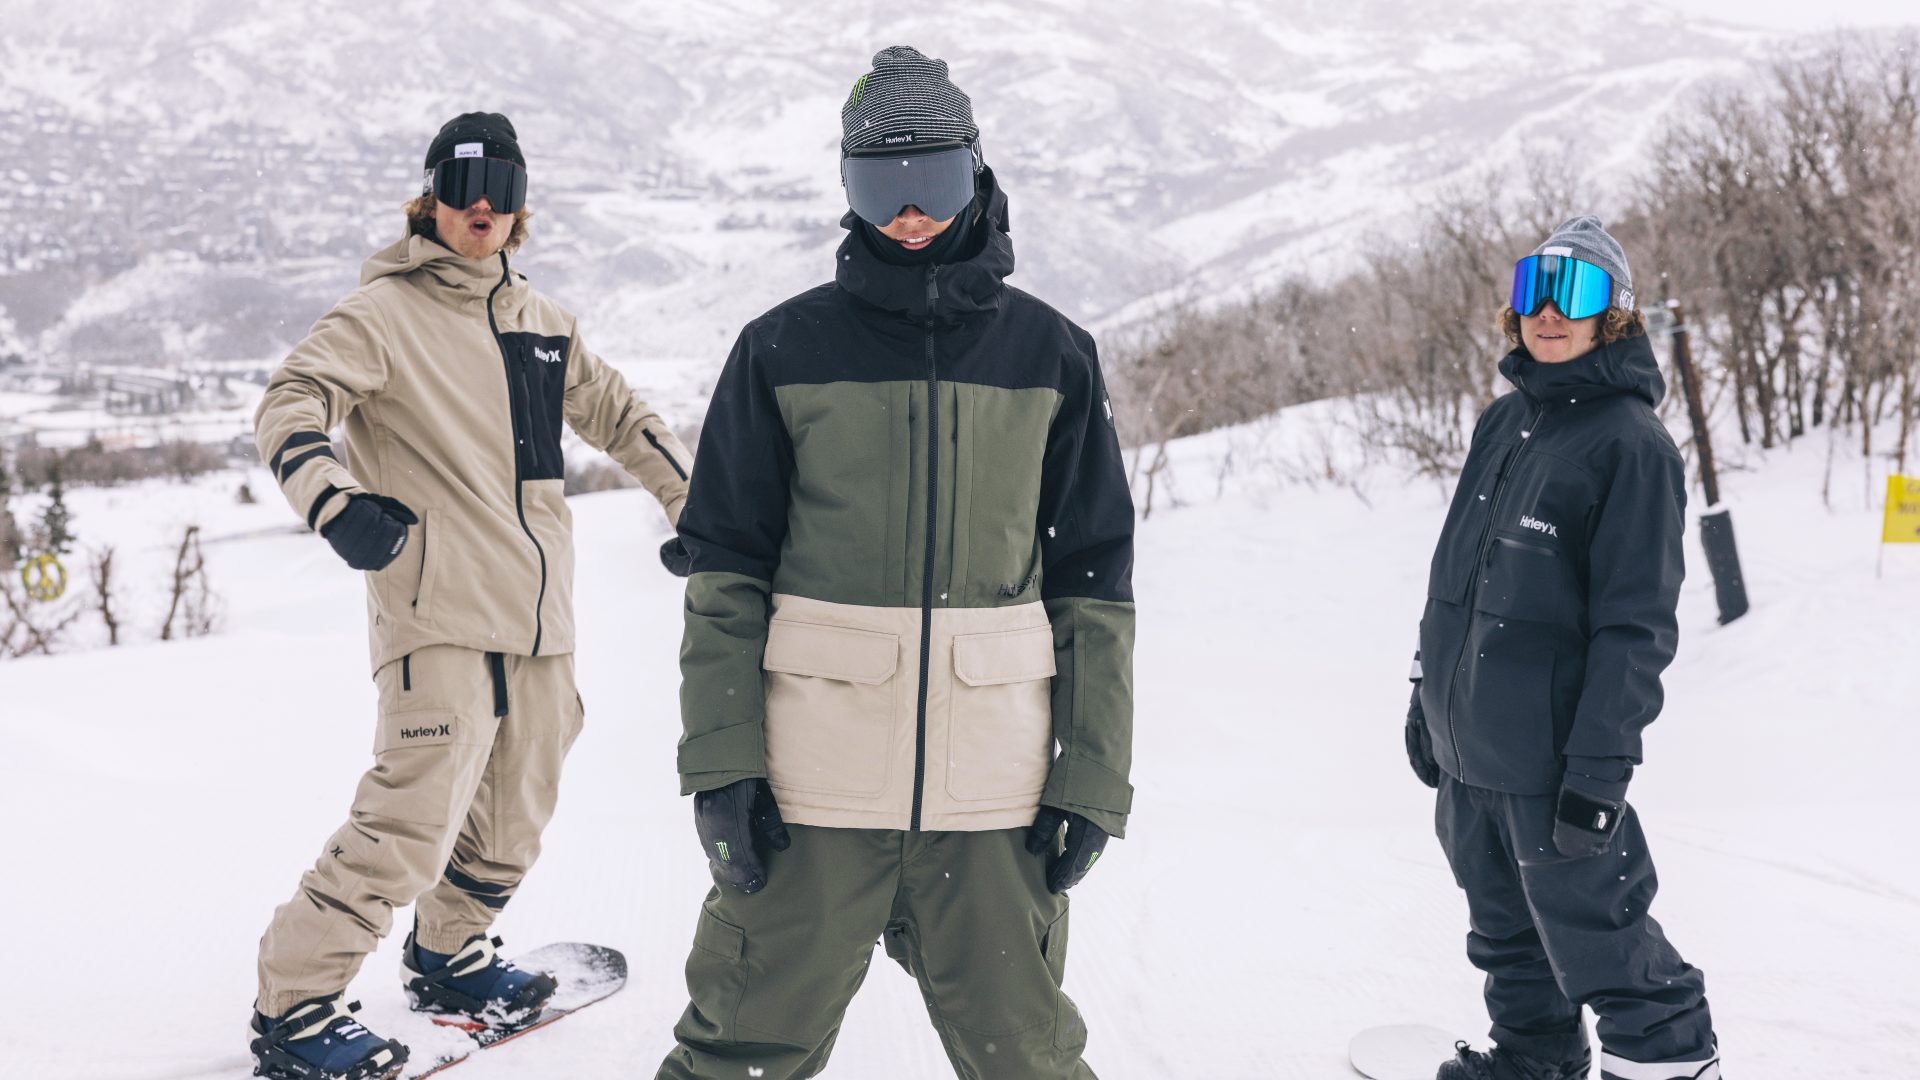 How To Choose Snowboarding Outerwear - Jacket & Trousers